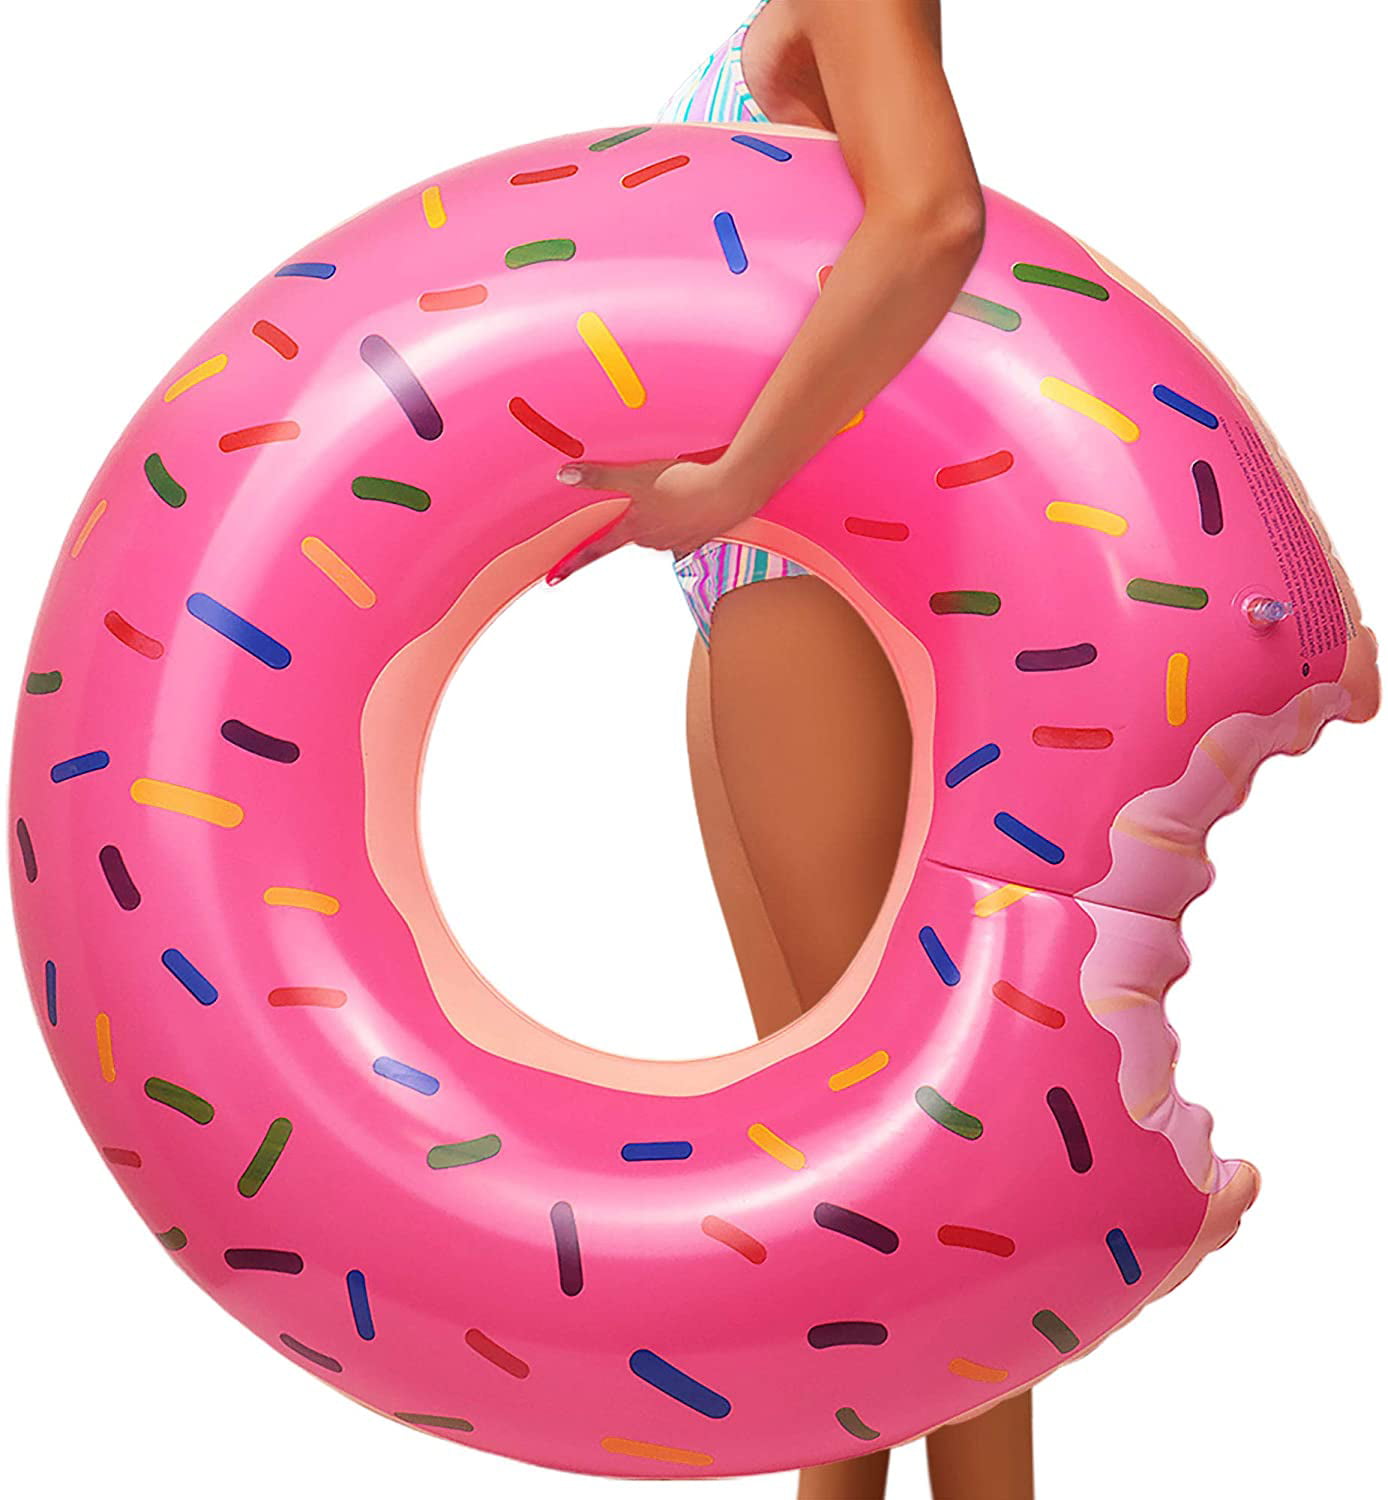 Large Inflatable Swim Donut Fashion Ring Lounger Beach Swimming Toy 